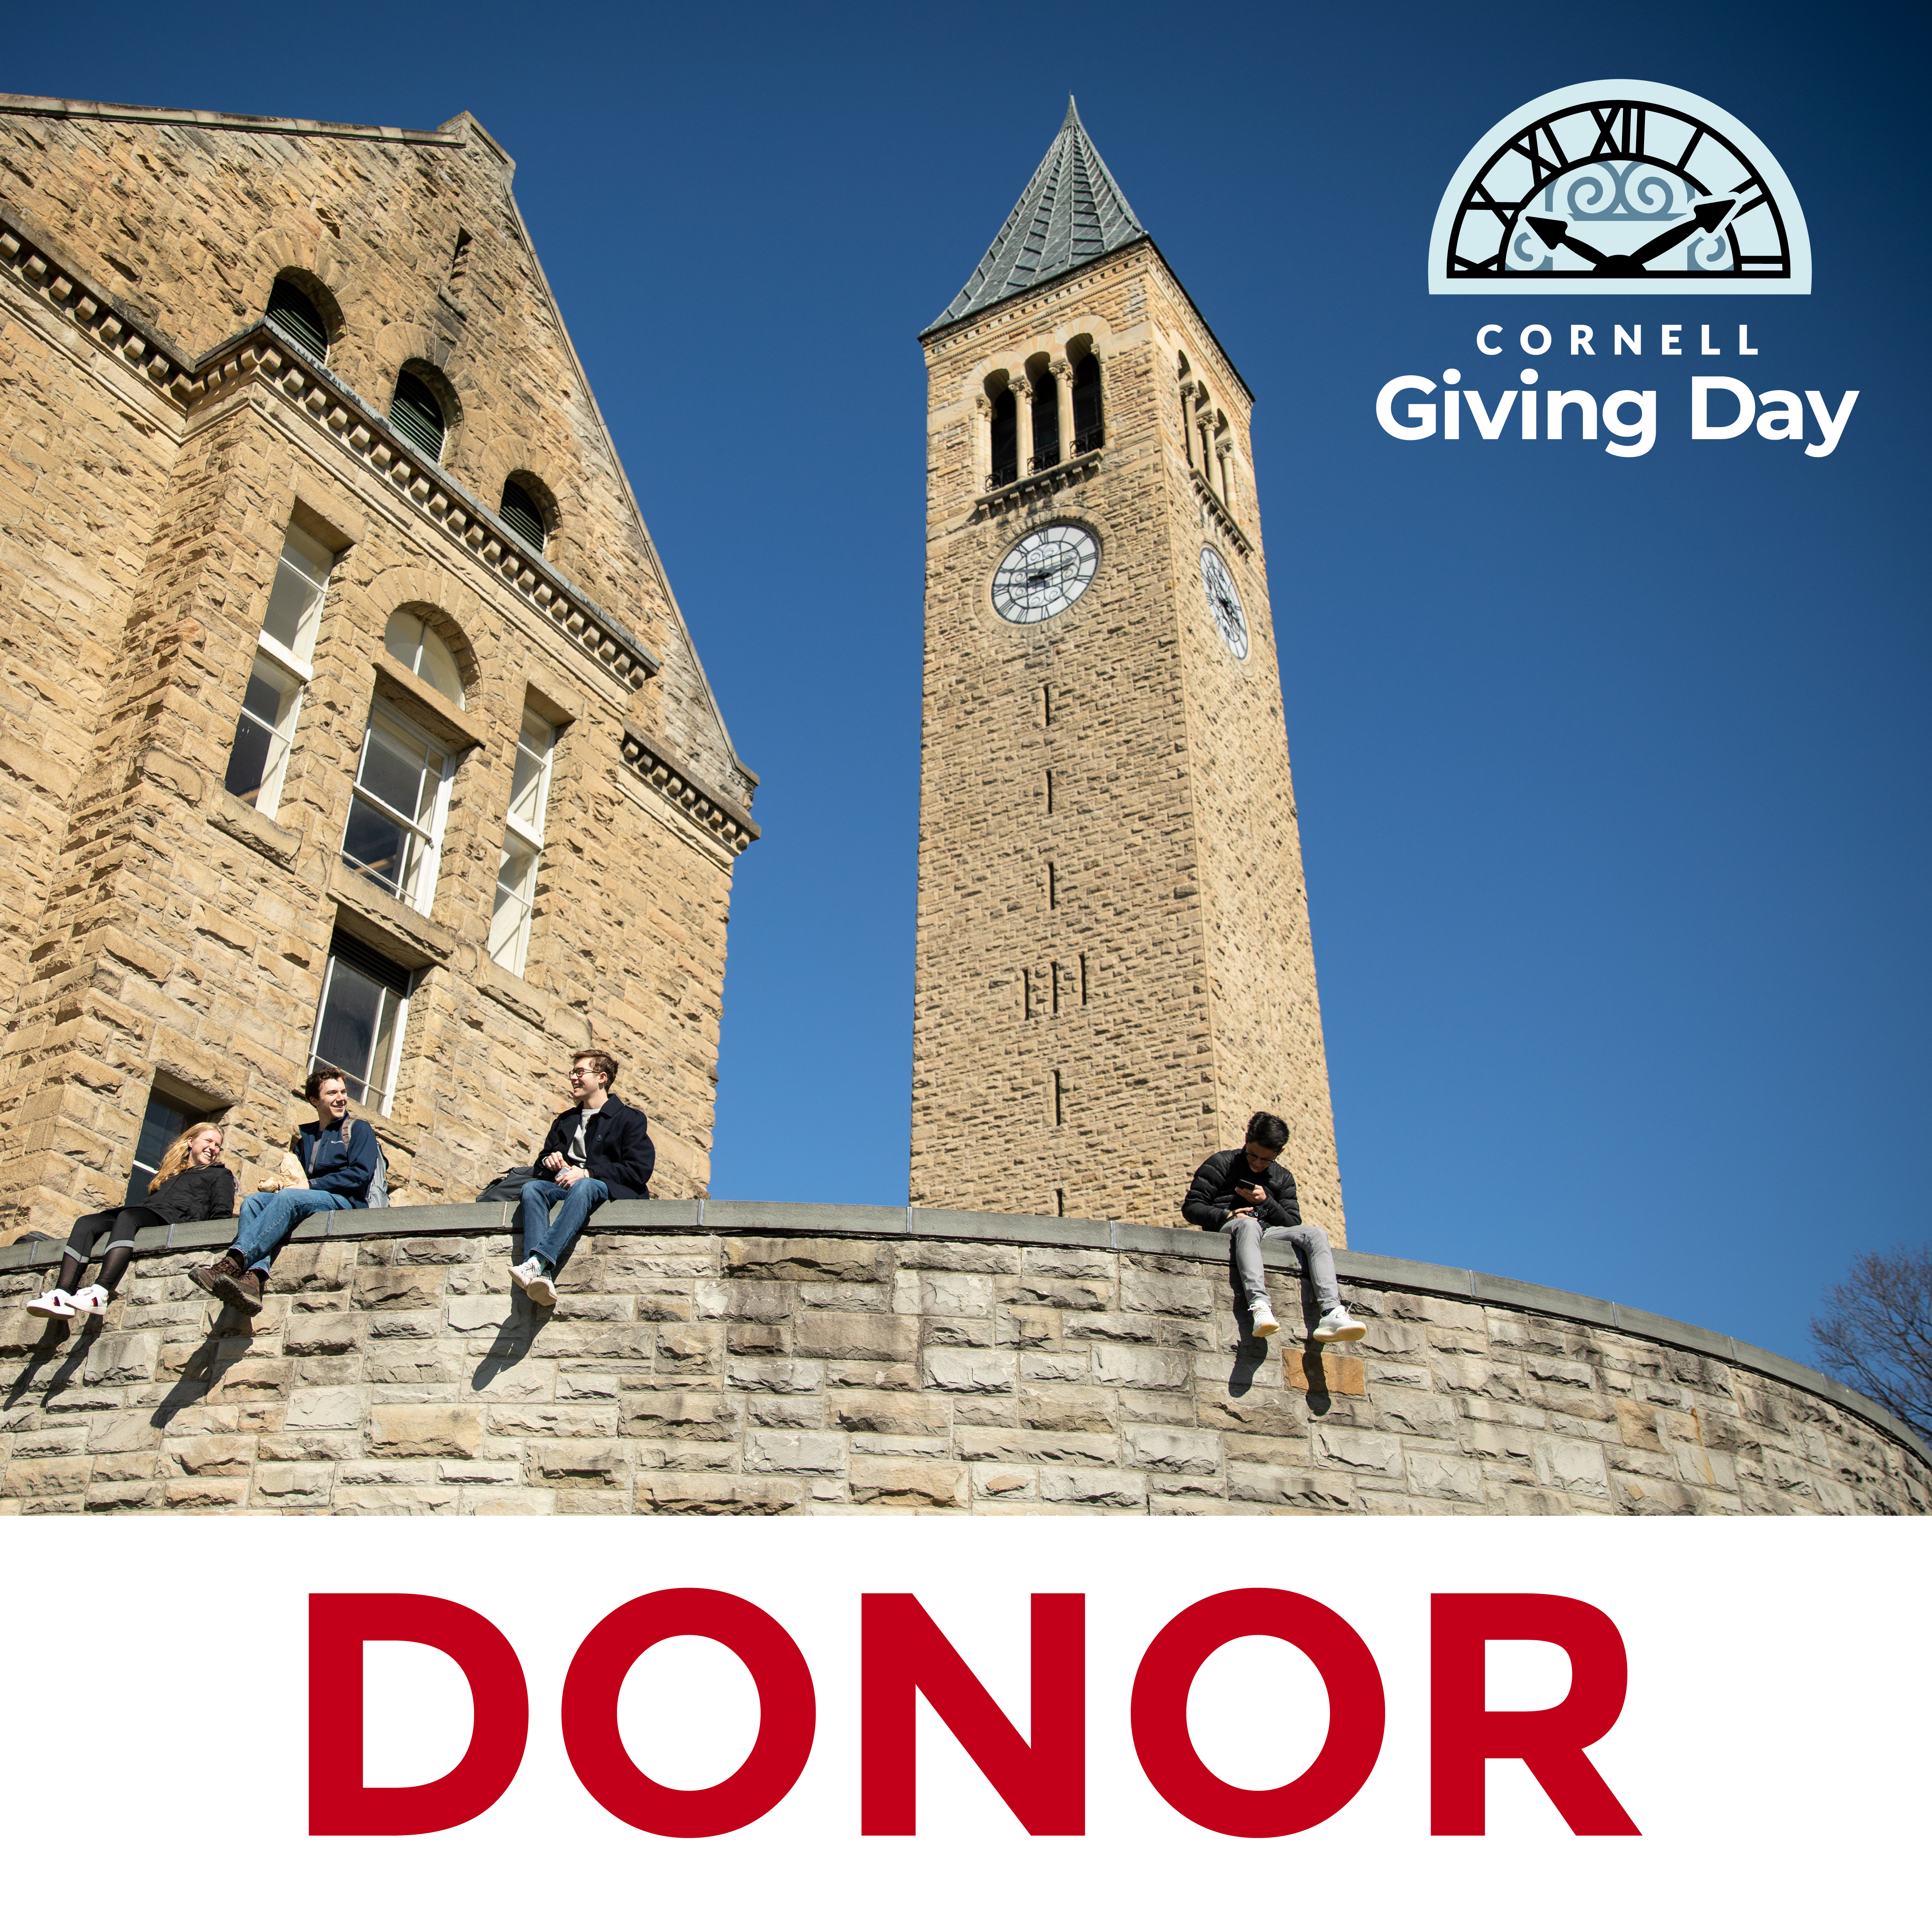 Donor Badge 2 -- Touchdown wearing a mask and waving saying I GAVE with Cornell Giving Day logo